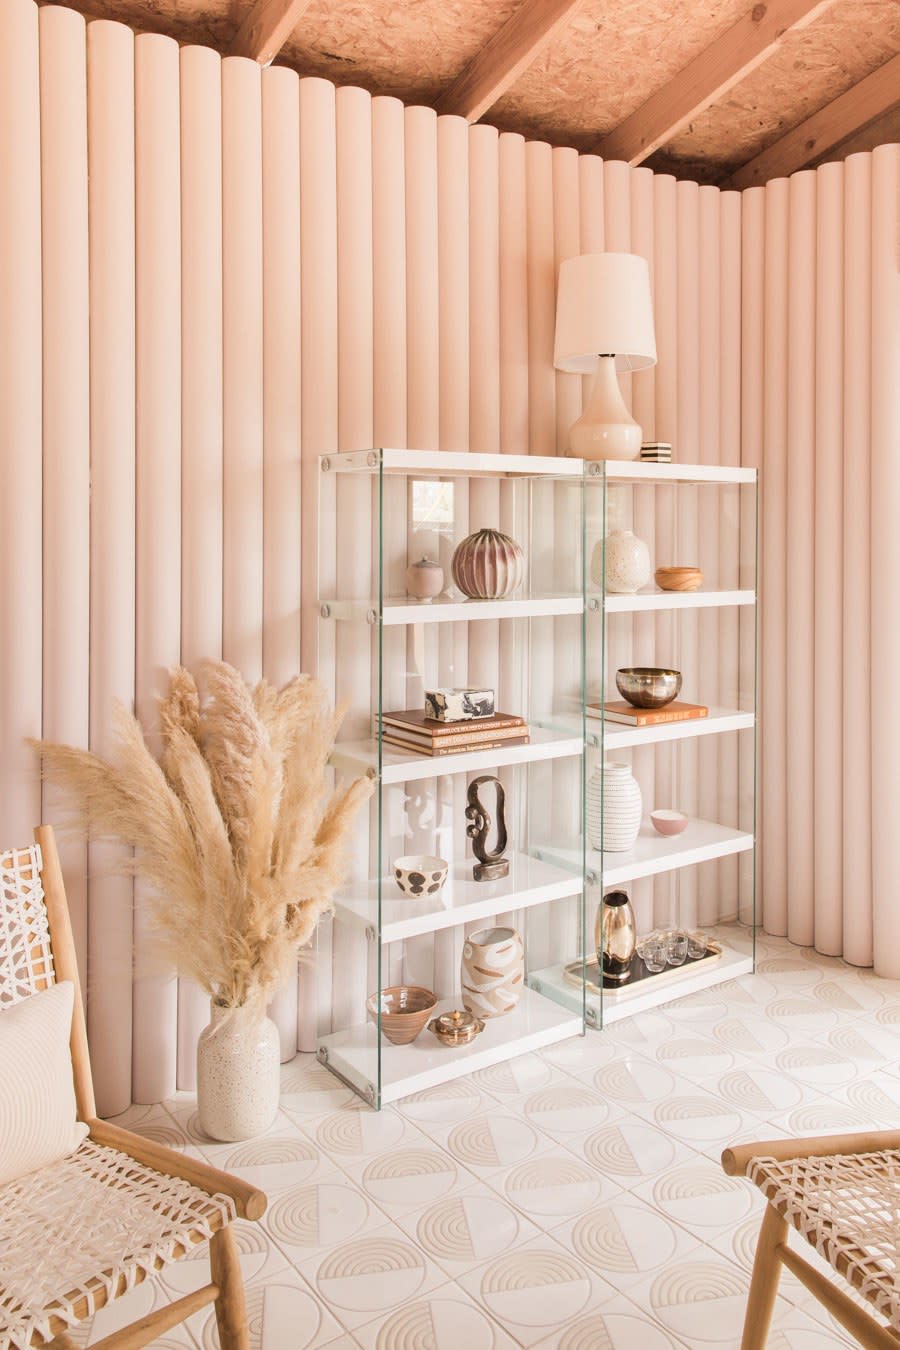 Maximum show-off potential with glass-sided bookcases.